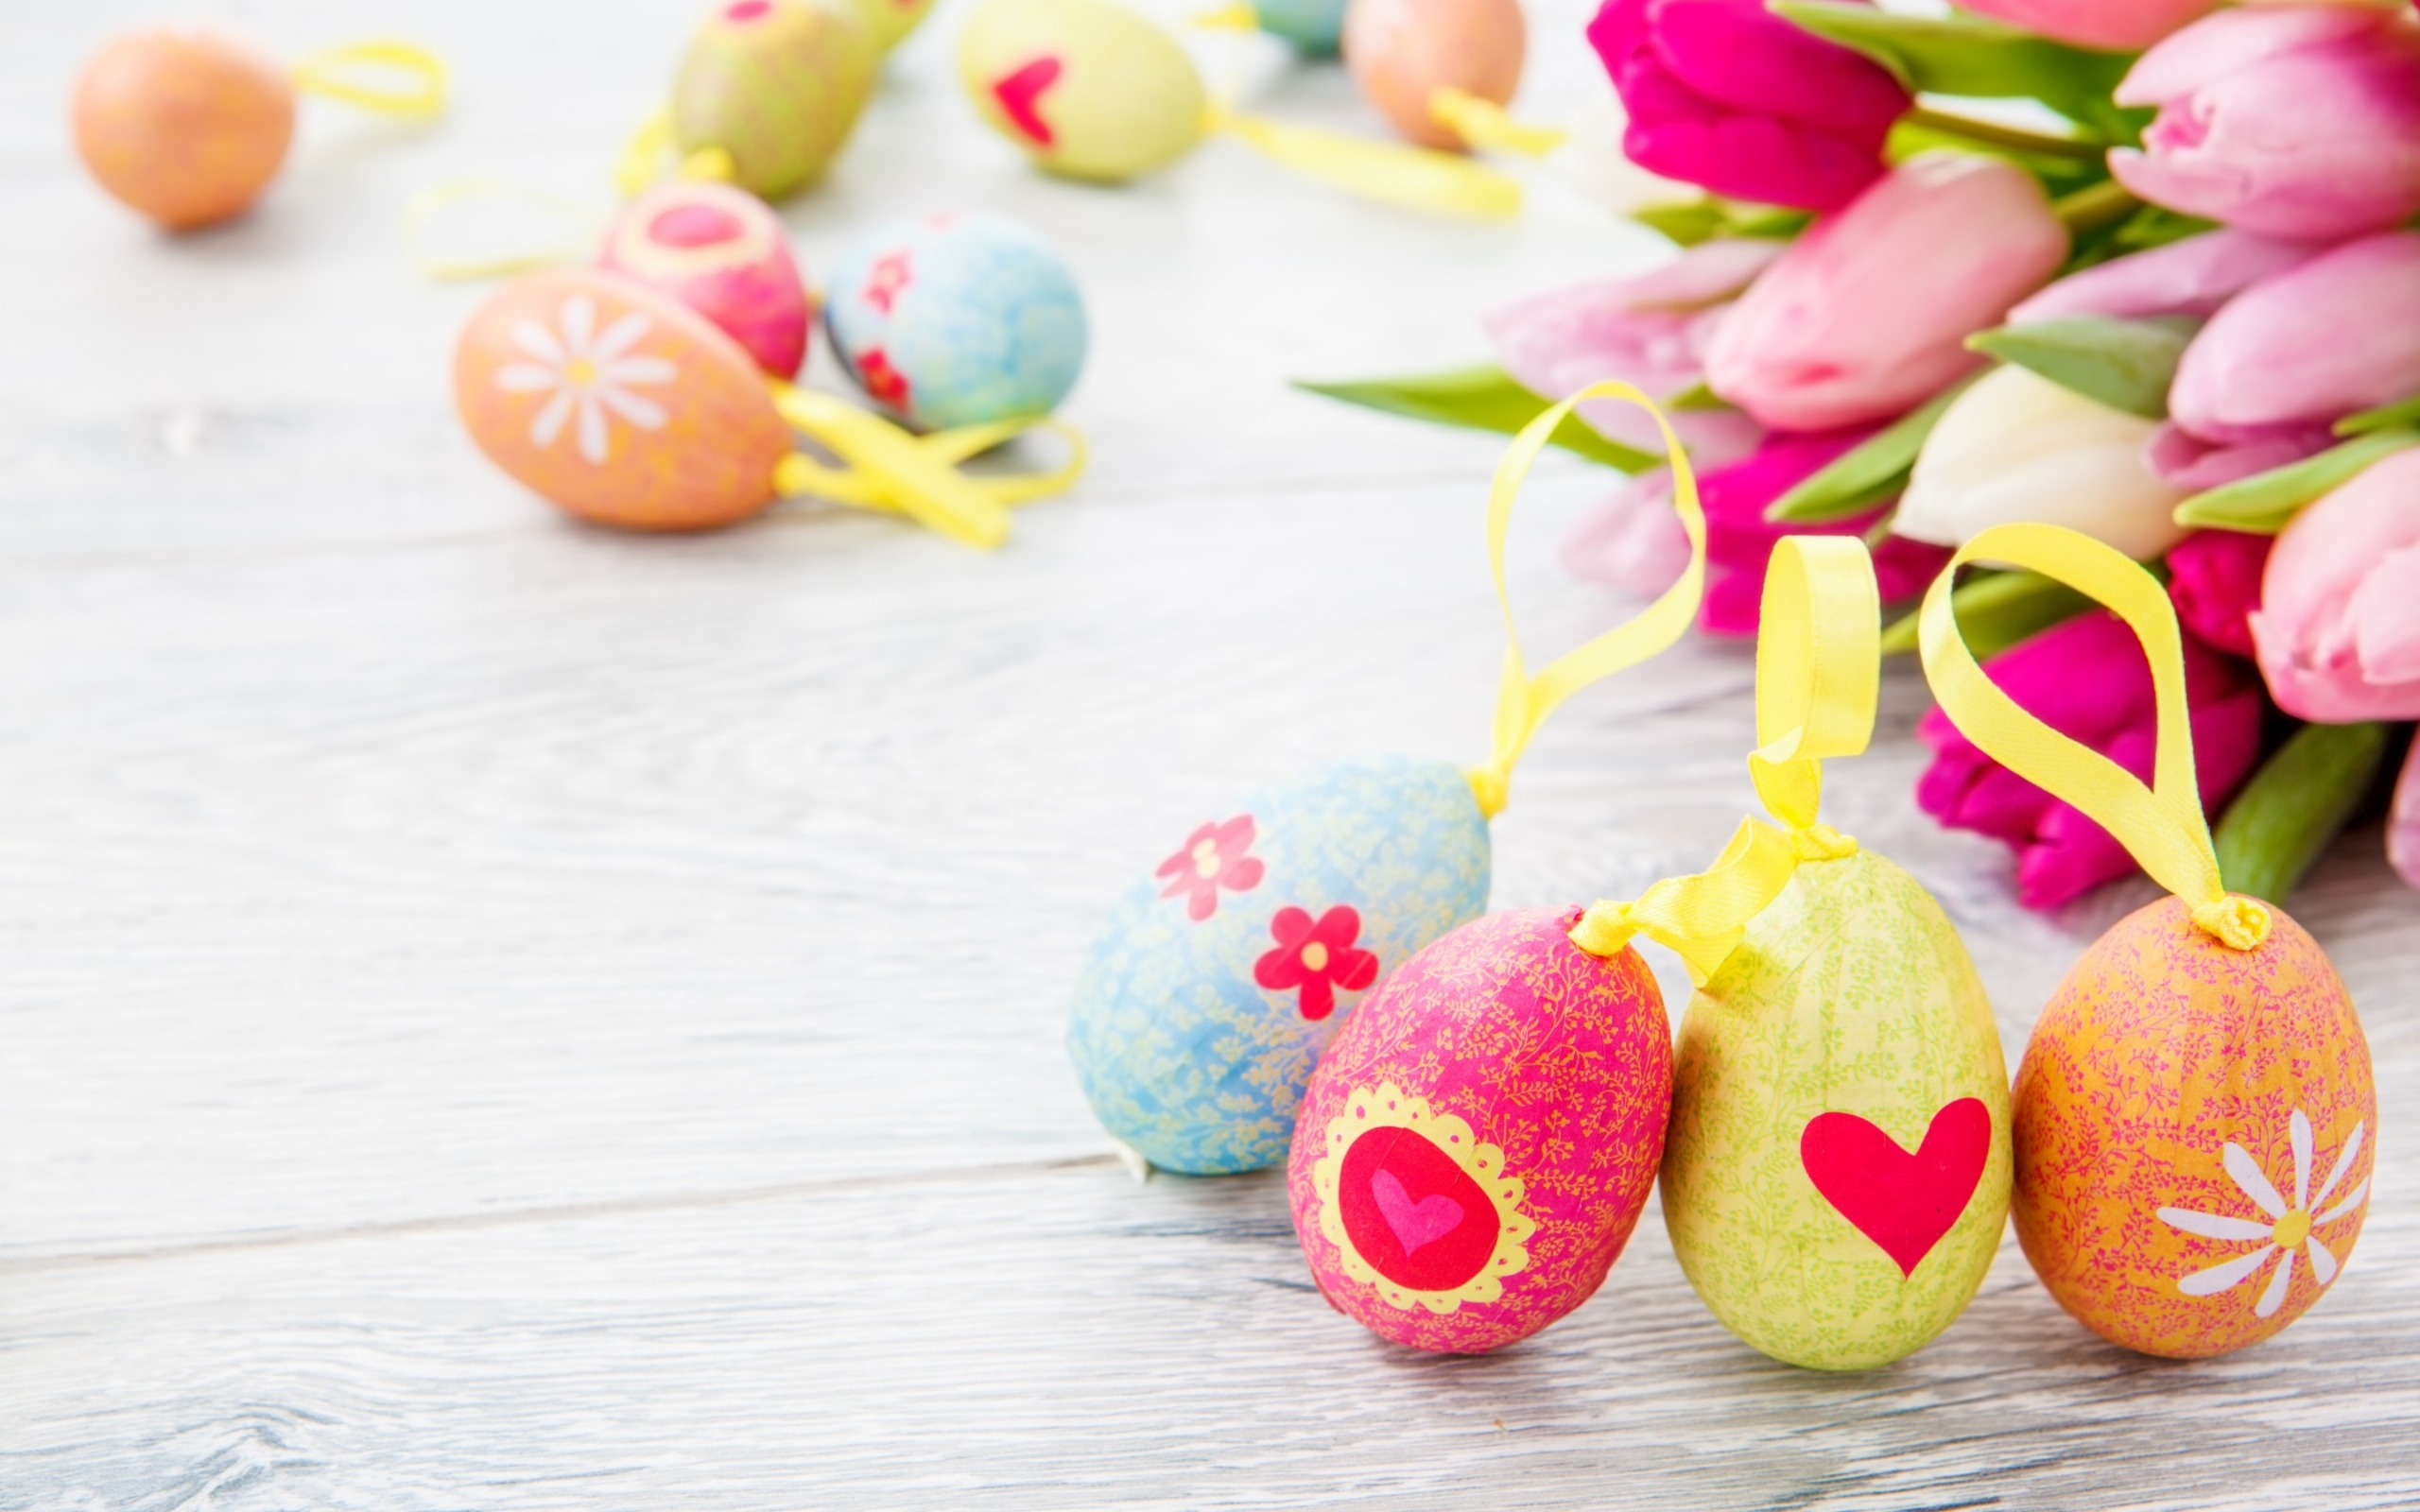 Decorative Easter Eggs for 2560 x 1600 widescreen resolution